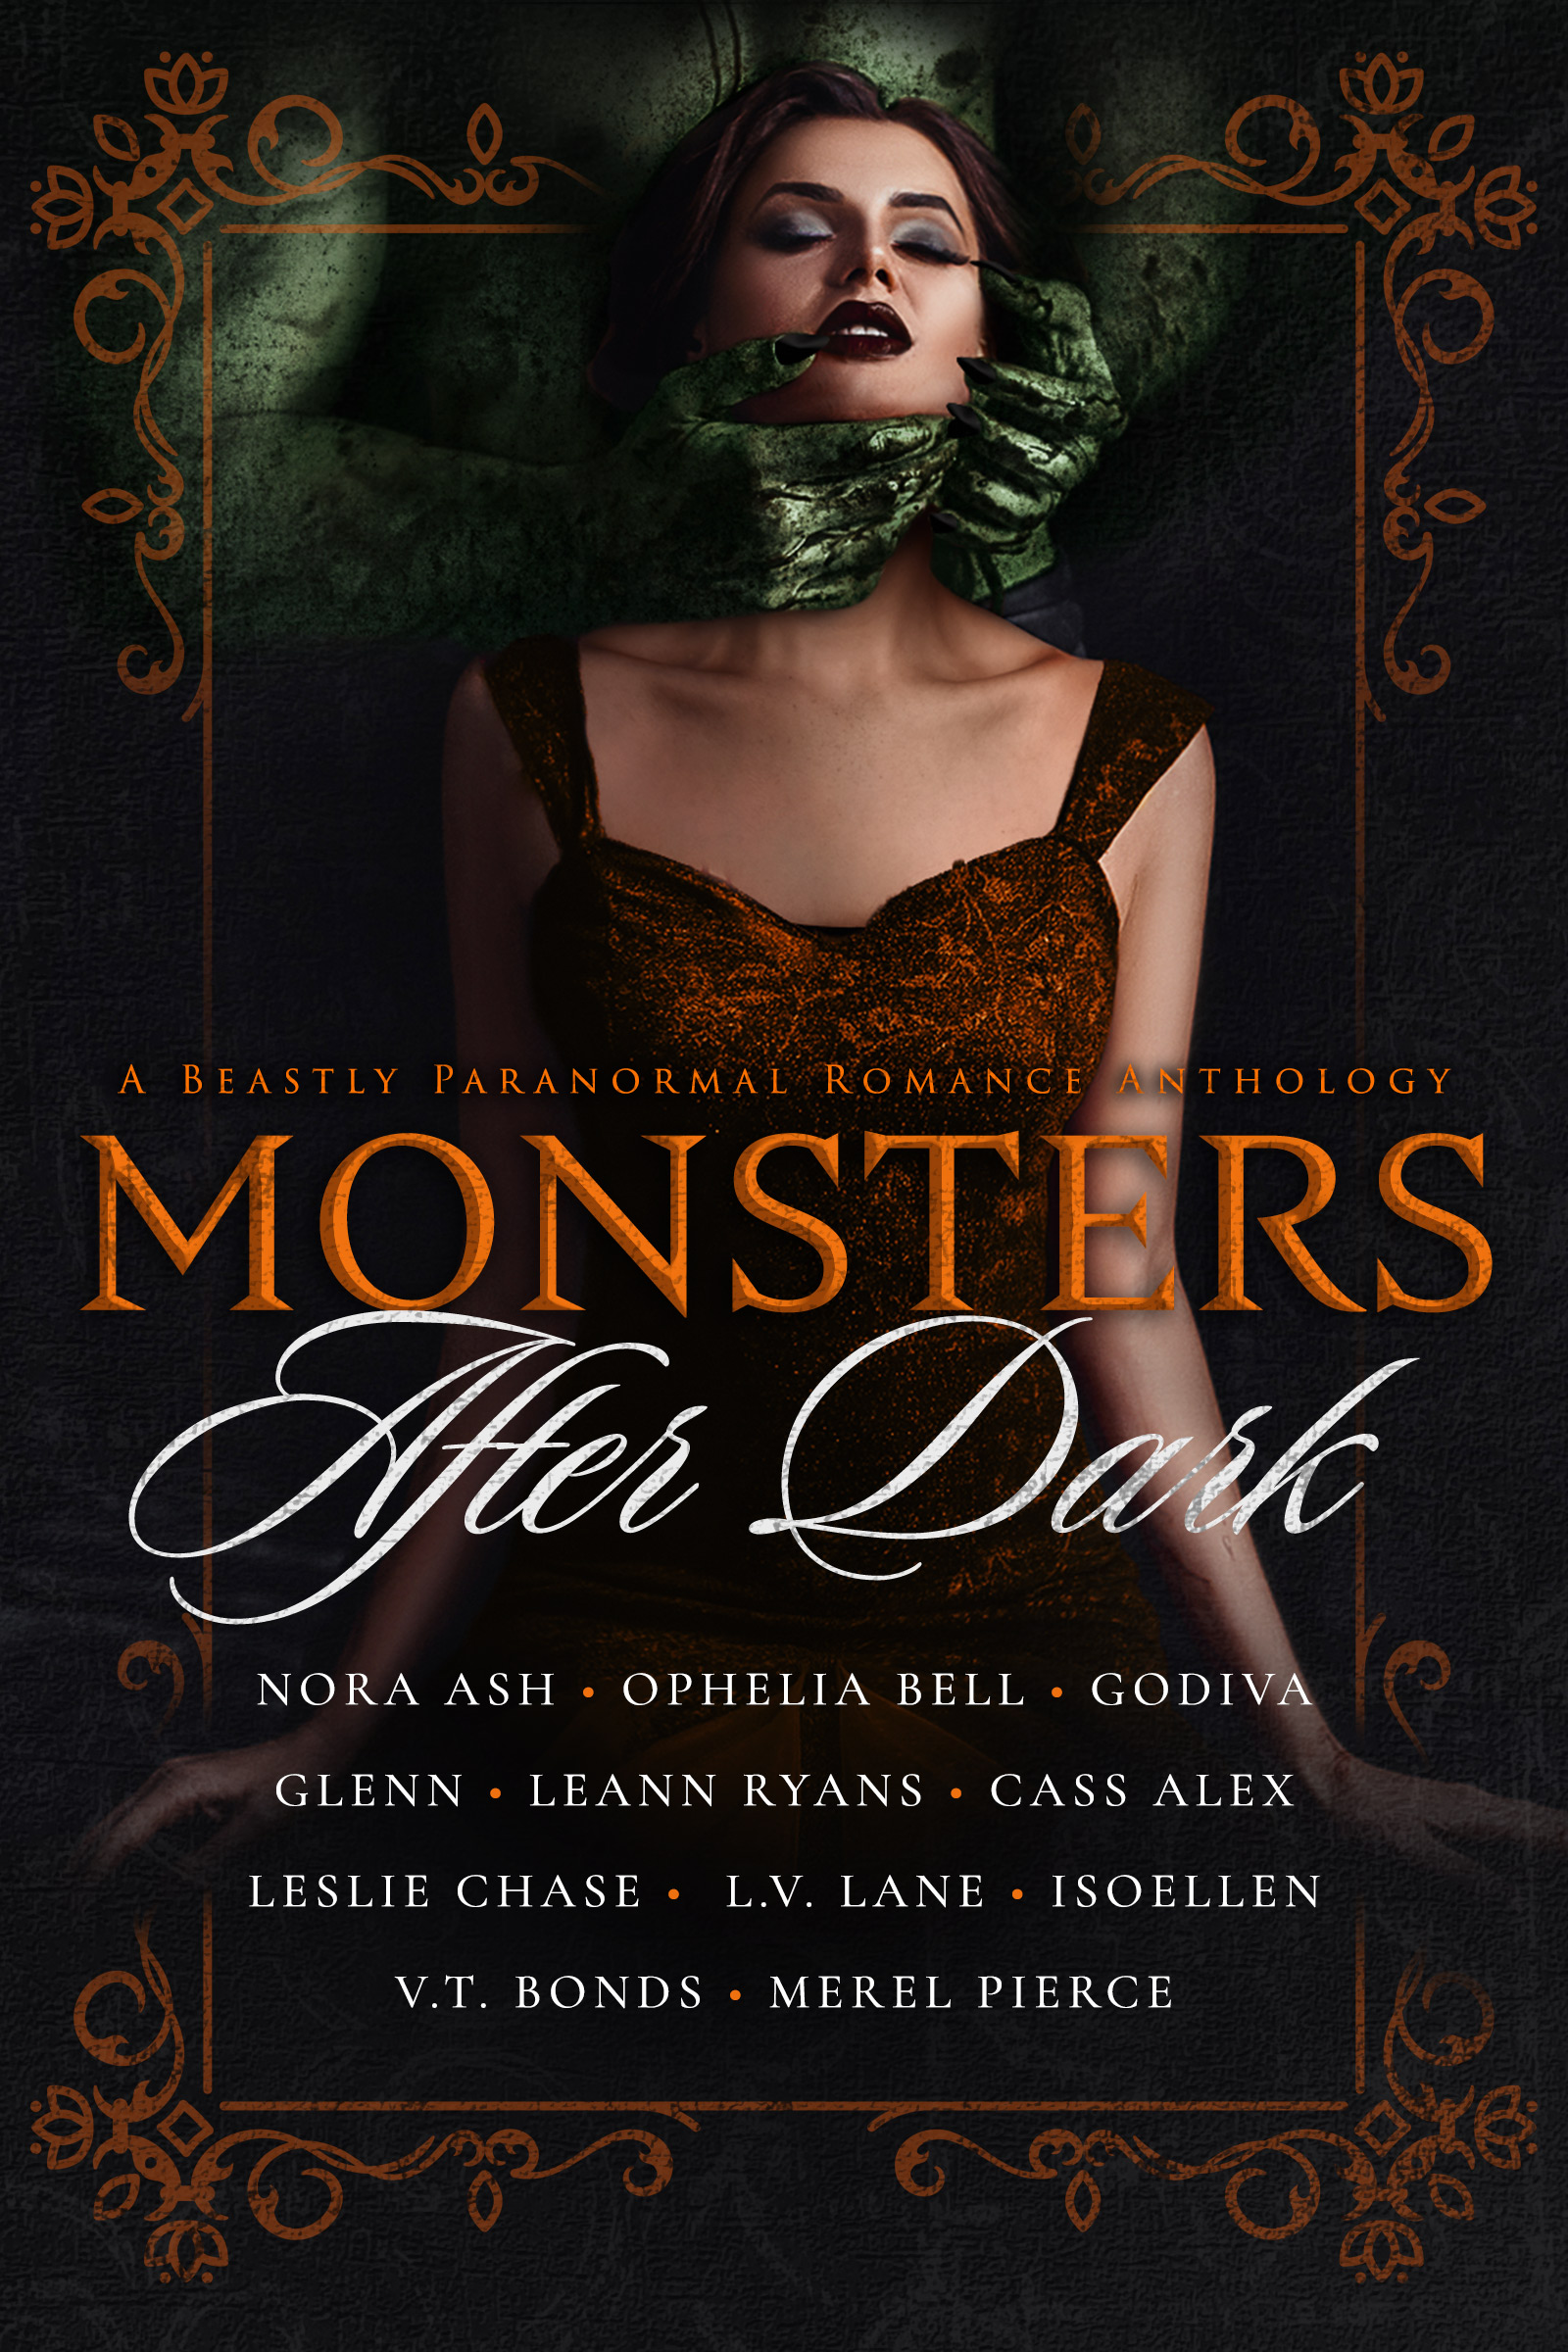 Monsters After Dark: A Beastly Paranormal Romance Anthology